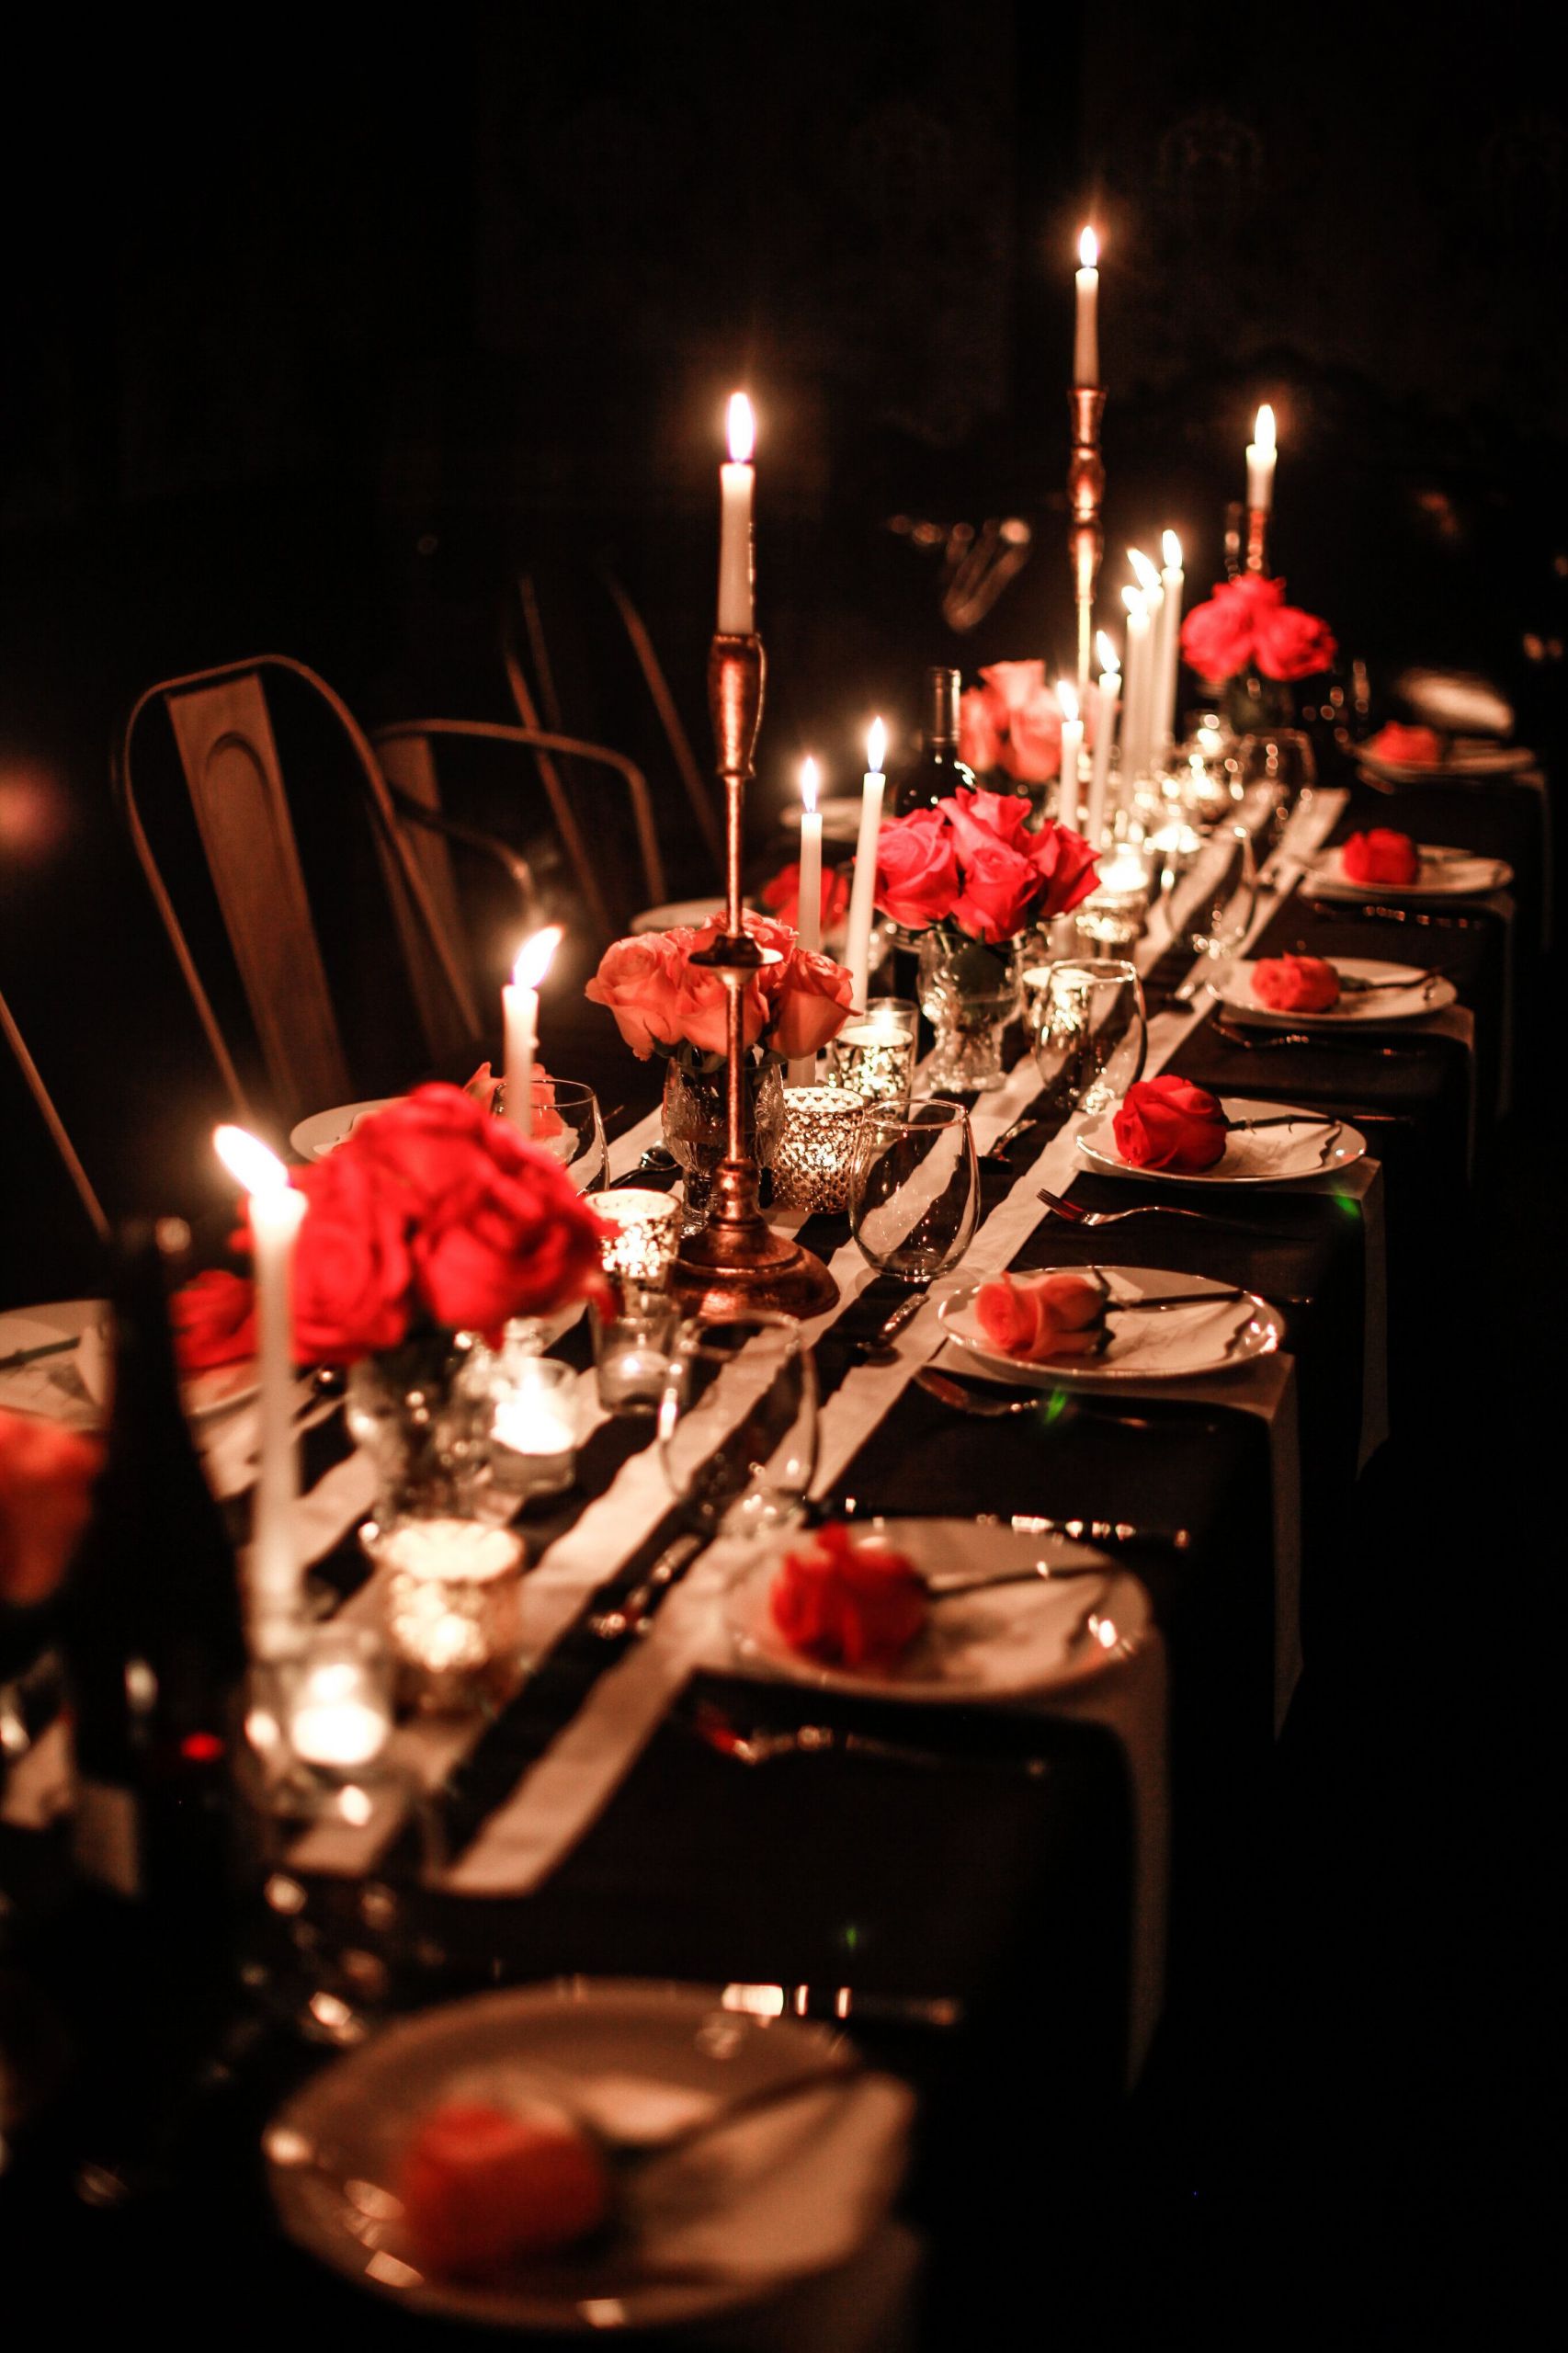 Bachelorette Party Dinner Ideas Nyc
 Intimate Parisian Bachelorette Party Dinner